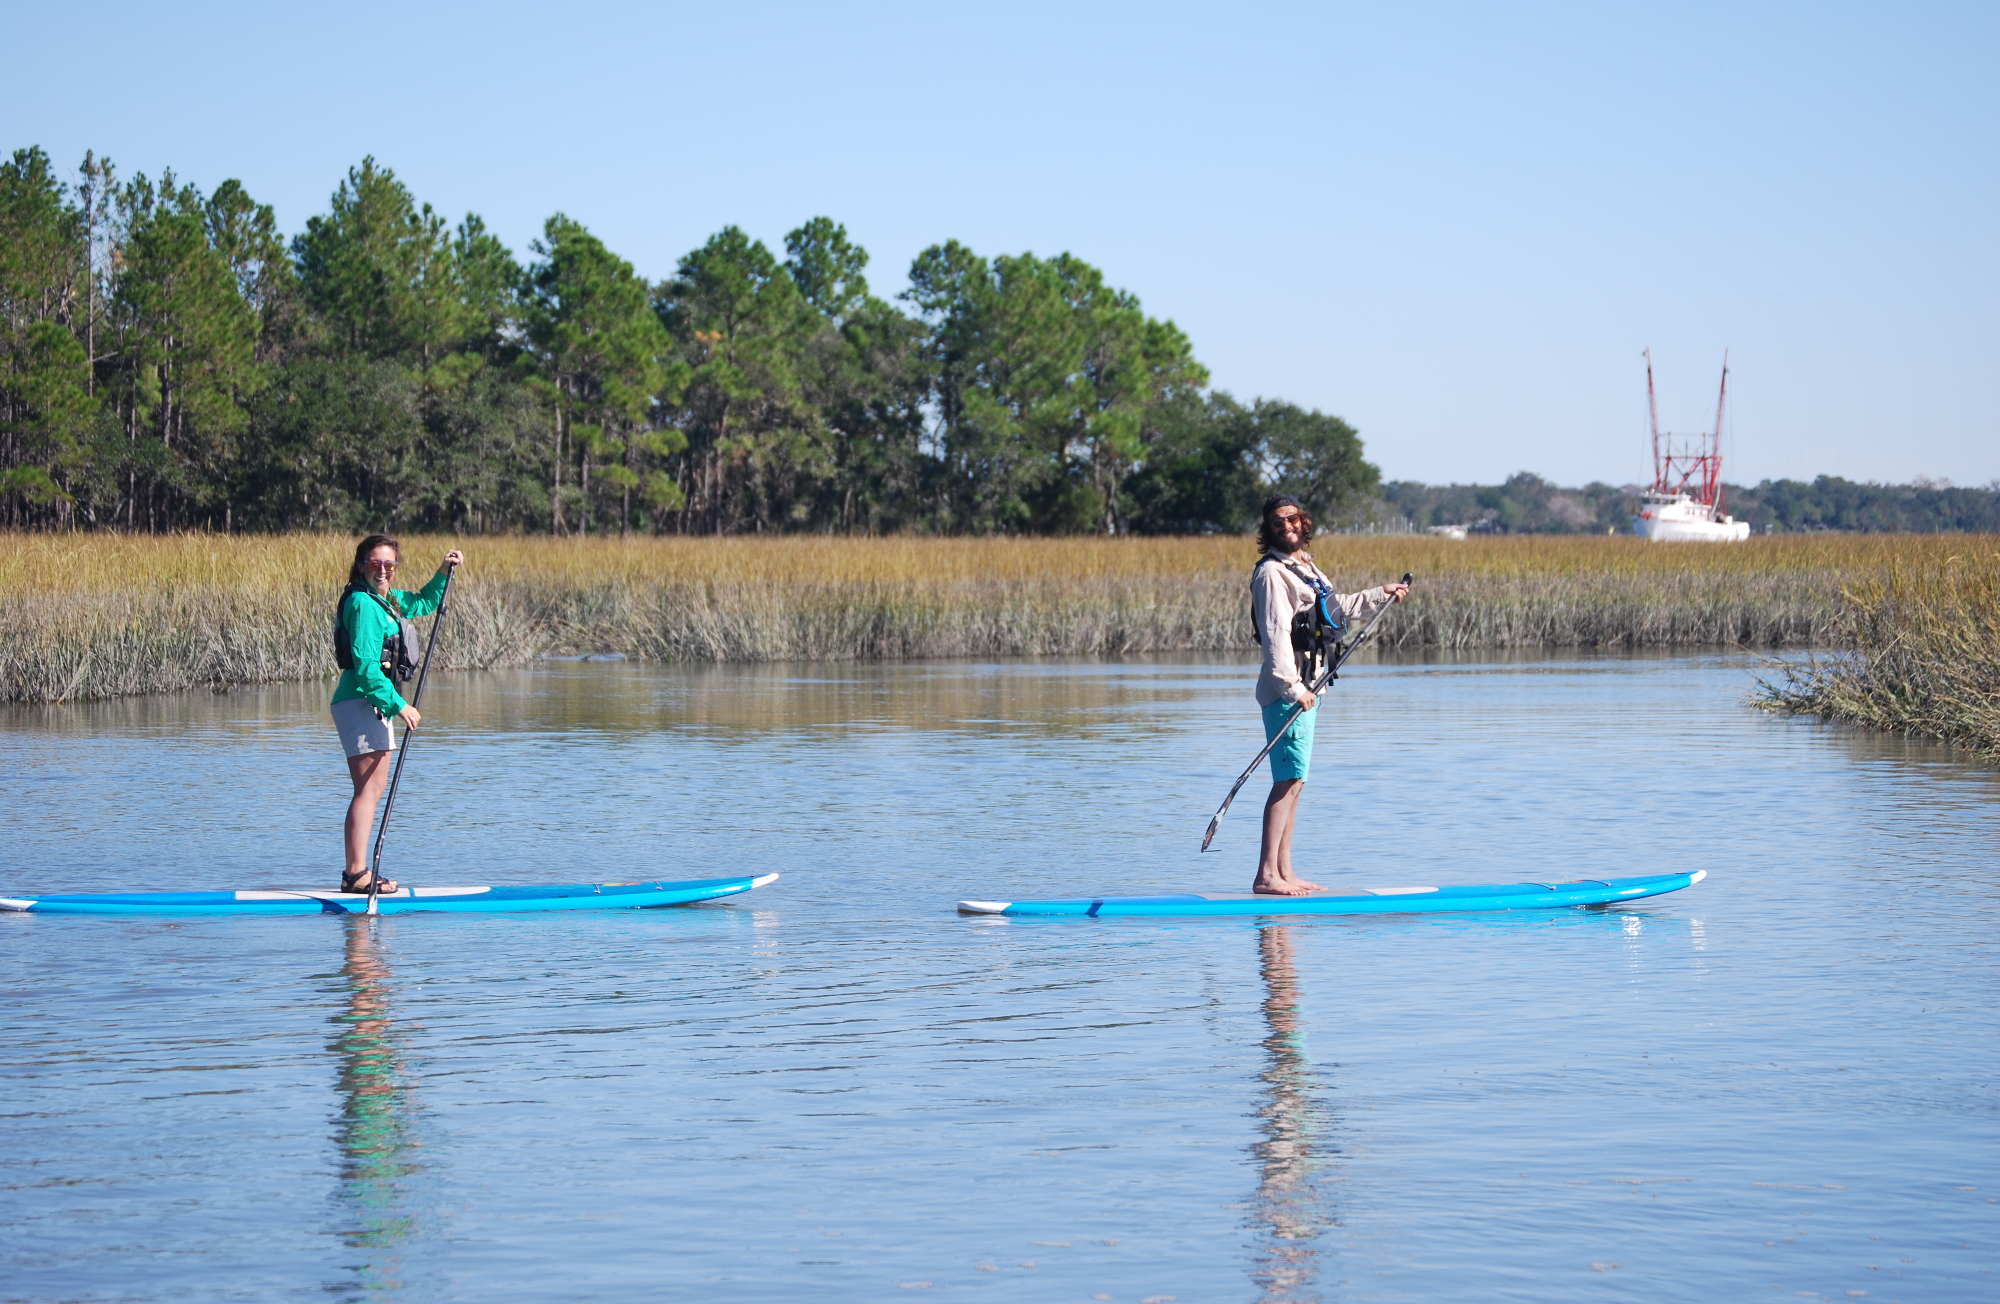 Paddleboarding in a small creek